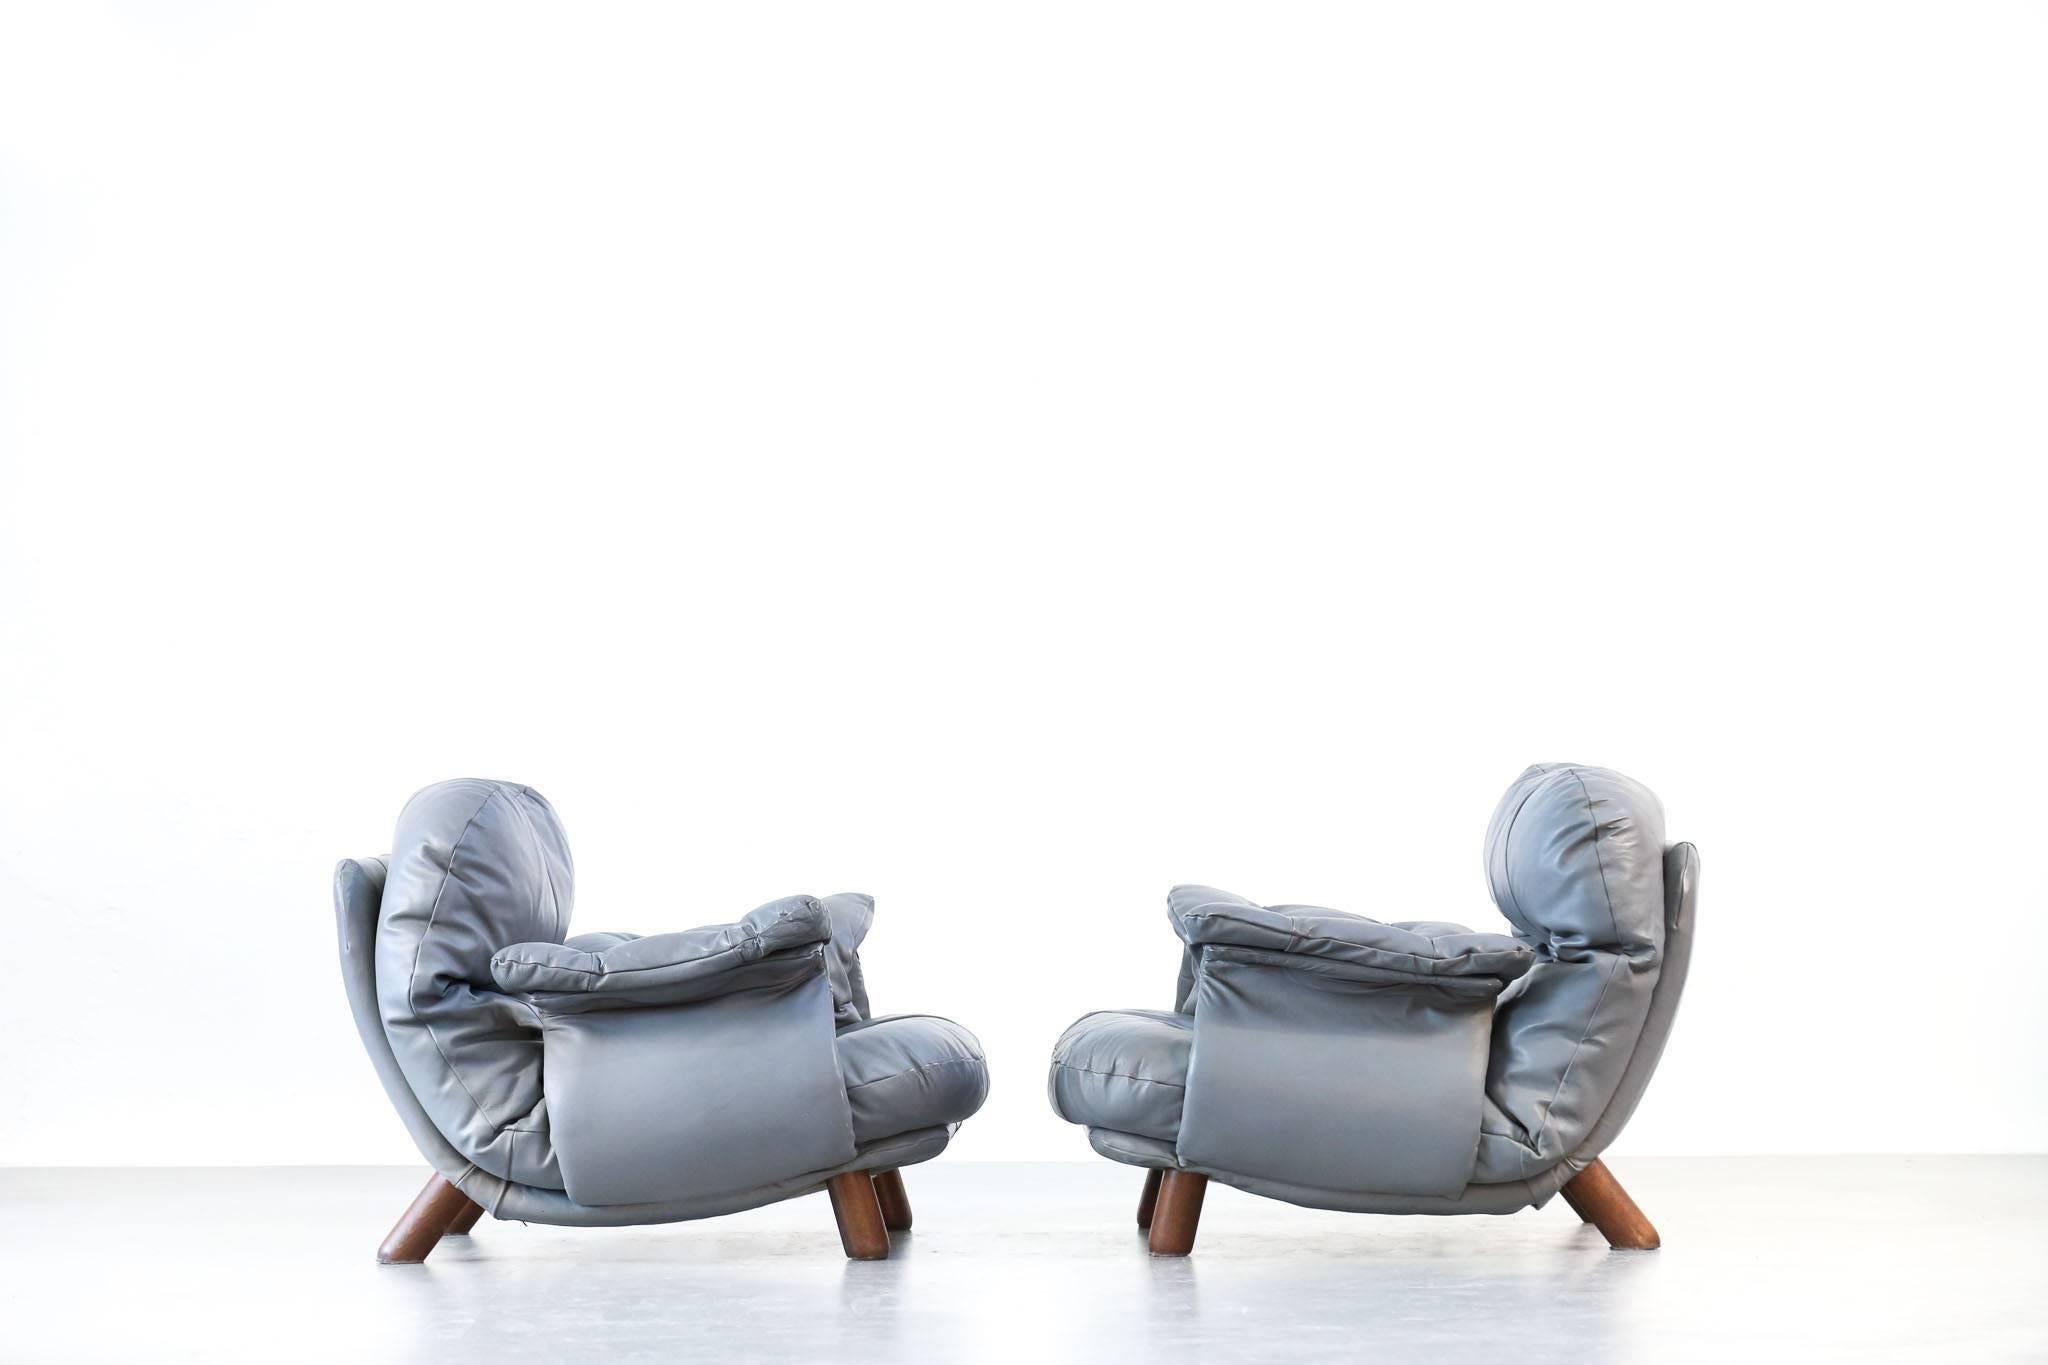 Pair of Lounge Chairs by E. Cobianchi, Italian Design  2